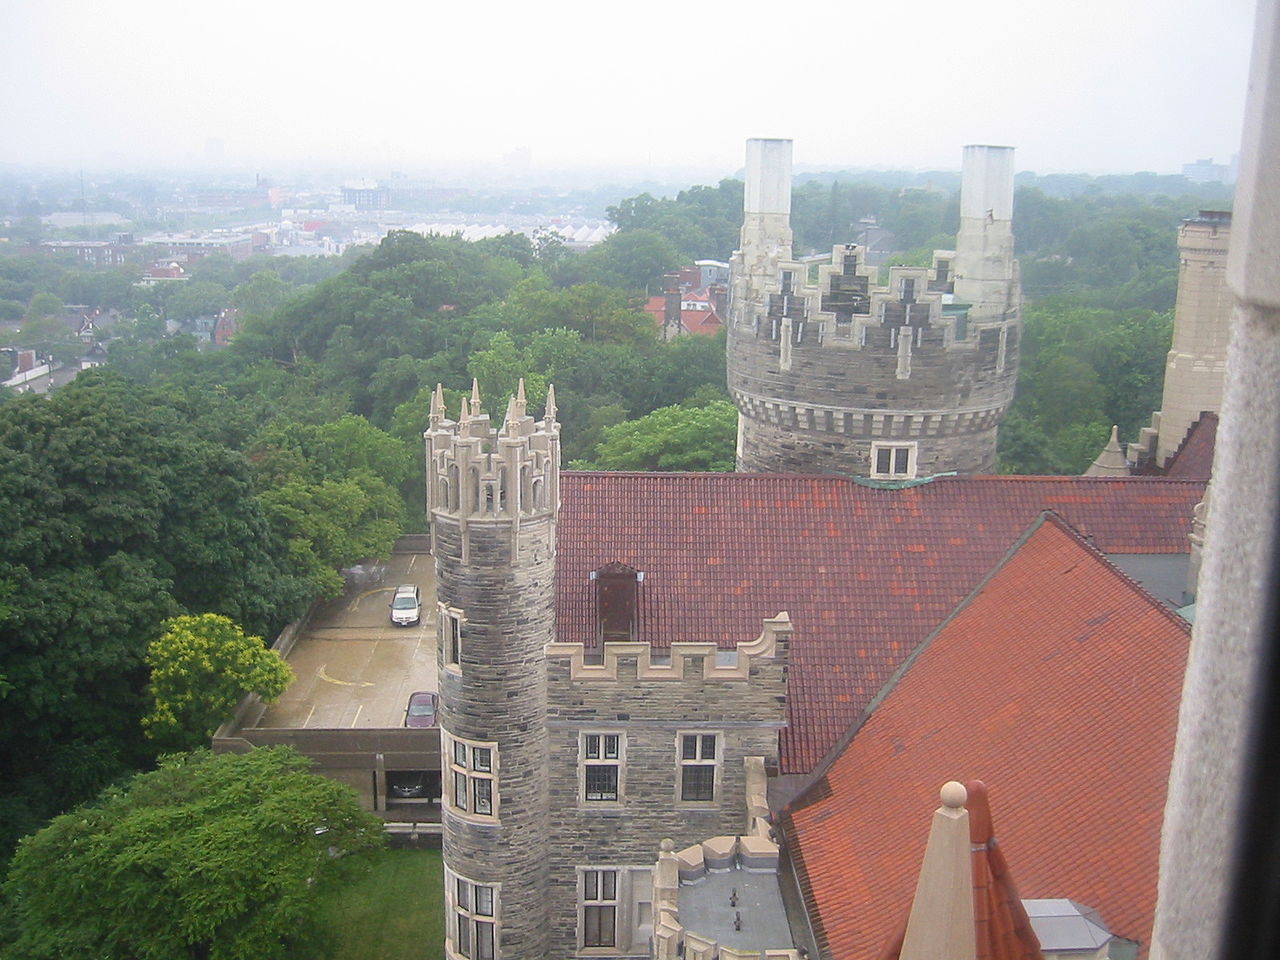 View of Casa Loma from one of its towers showing the main roof and two towers and part of the parking lot with parts of the city below in the background